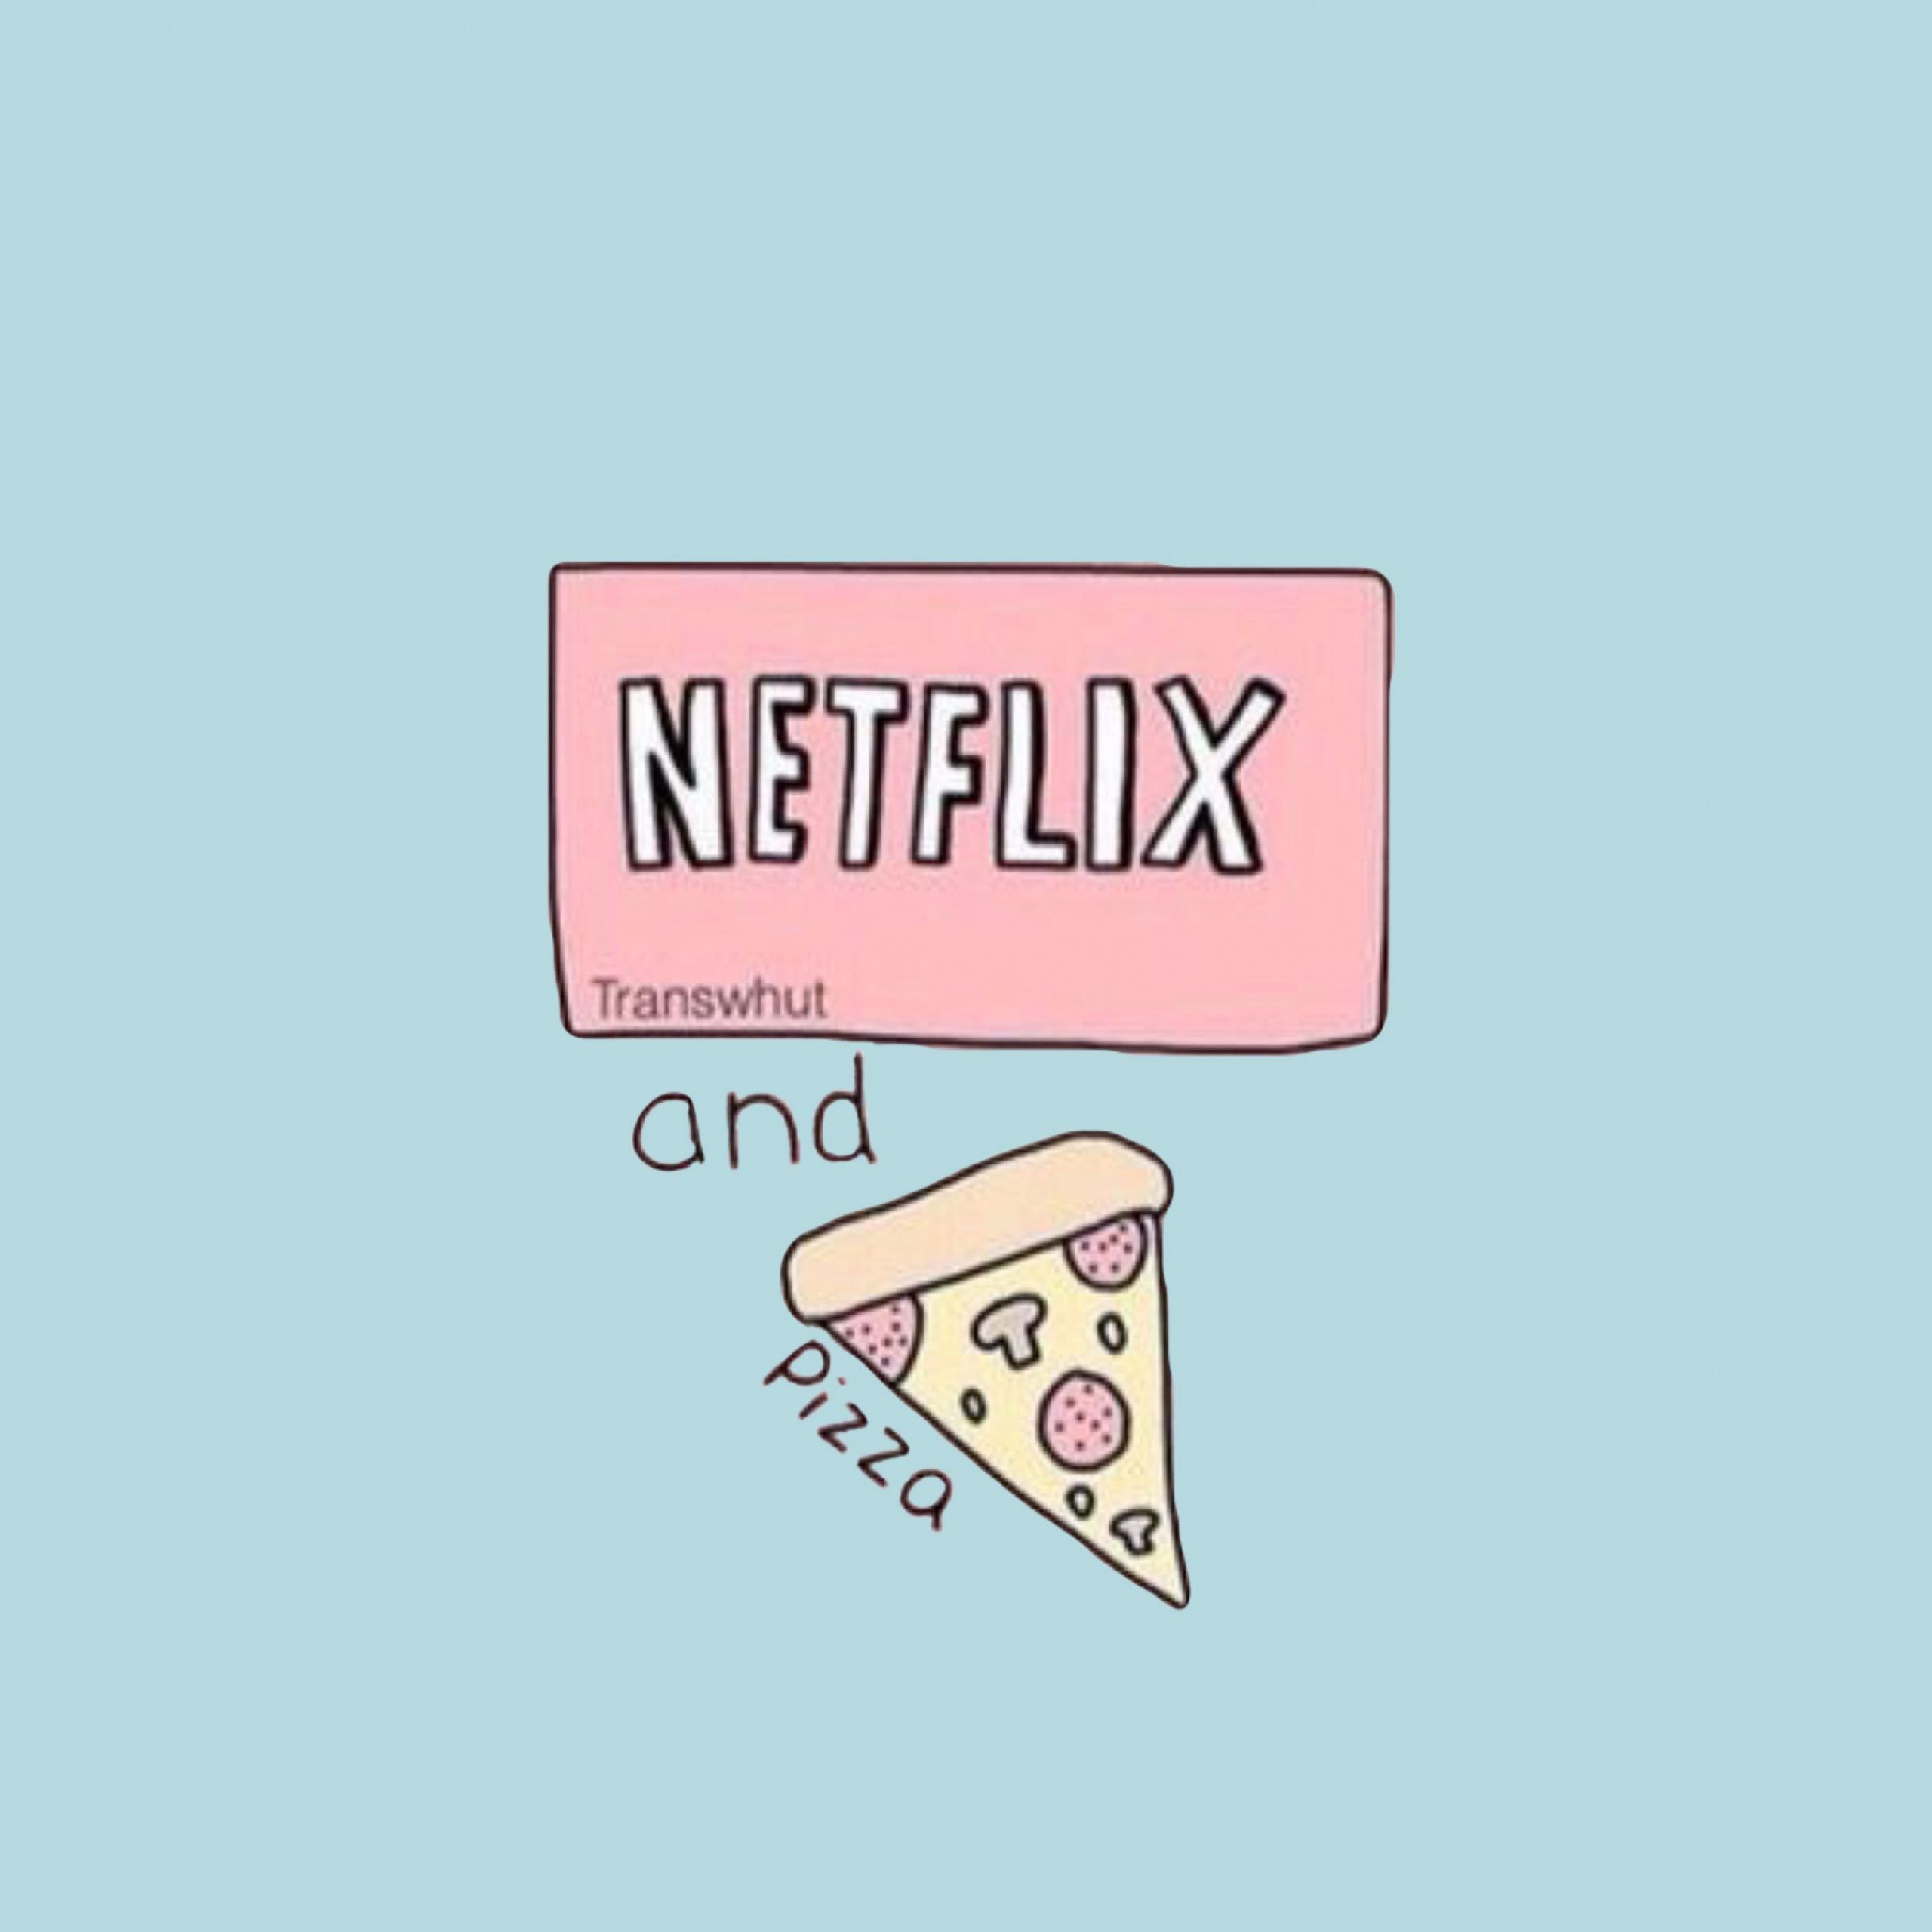 The image of a pizza and netflix - Netflix